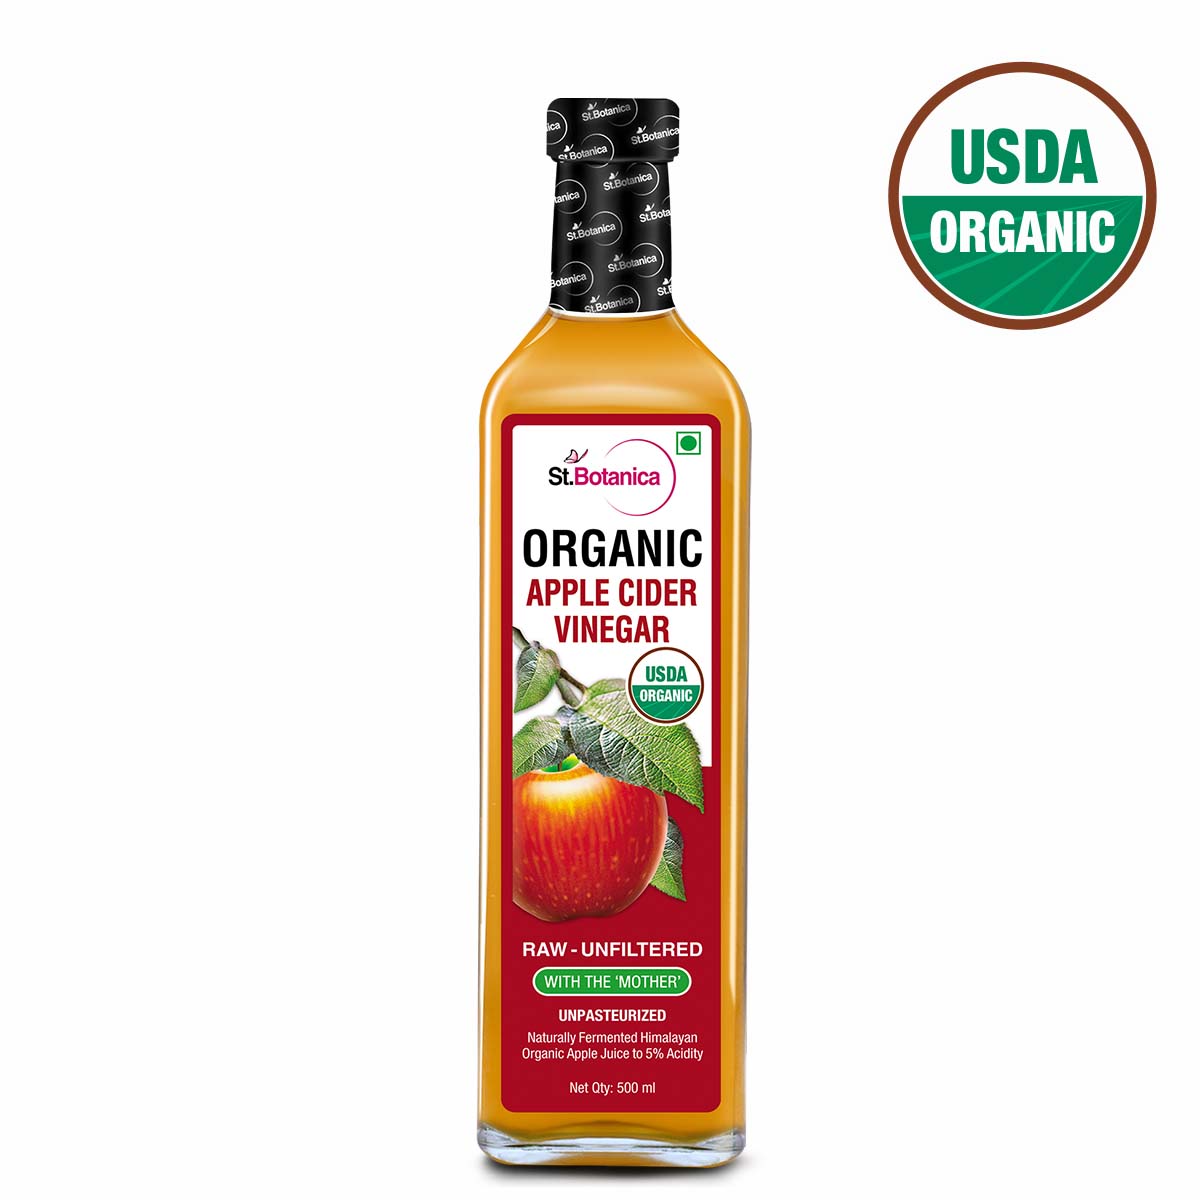 St.Botanica USDA Organic Apple Cider Vinegar With The Mother - Raw, Unfiltered, UnPasteurized - 500ml (Glass Bottle)